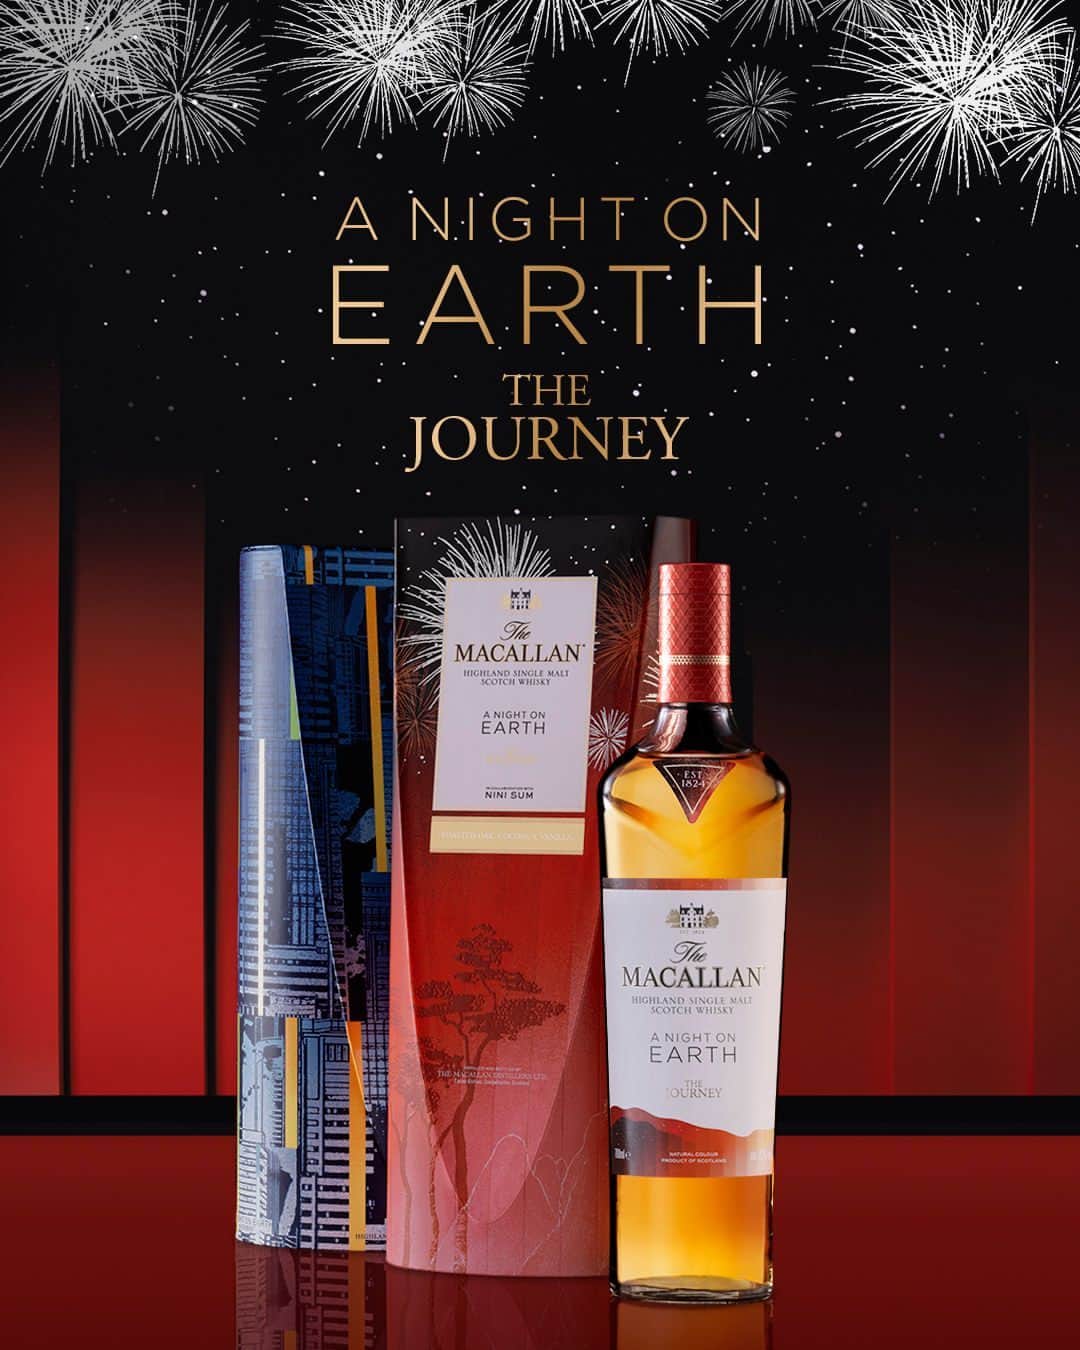 The Macallanのインスタグラム：「The ultimate gift, symbolising new beginnings and hope for the future.⁣ ⁣ The Macallan A Night on Earth – The Journey features an exceptional unboxing experience. Designed in three layers to parallel the return to family and old friends during New Year celebrations, our collaboration with the acclaimed artist Nini Sum has created a token of appreciation that will be cherished by loved ones.⁣ ⁣ Discover more via our link in bio.⁣ ⁣ Crafted without compromise. Please savour The Macallan responsibly.⁣ ⁣ #TheMacallan #ANightOnEarth」